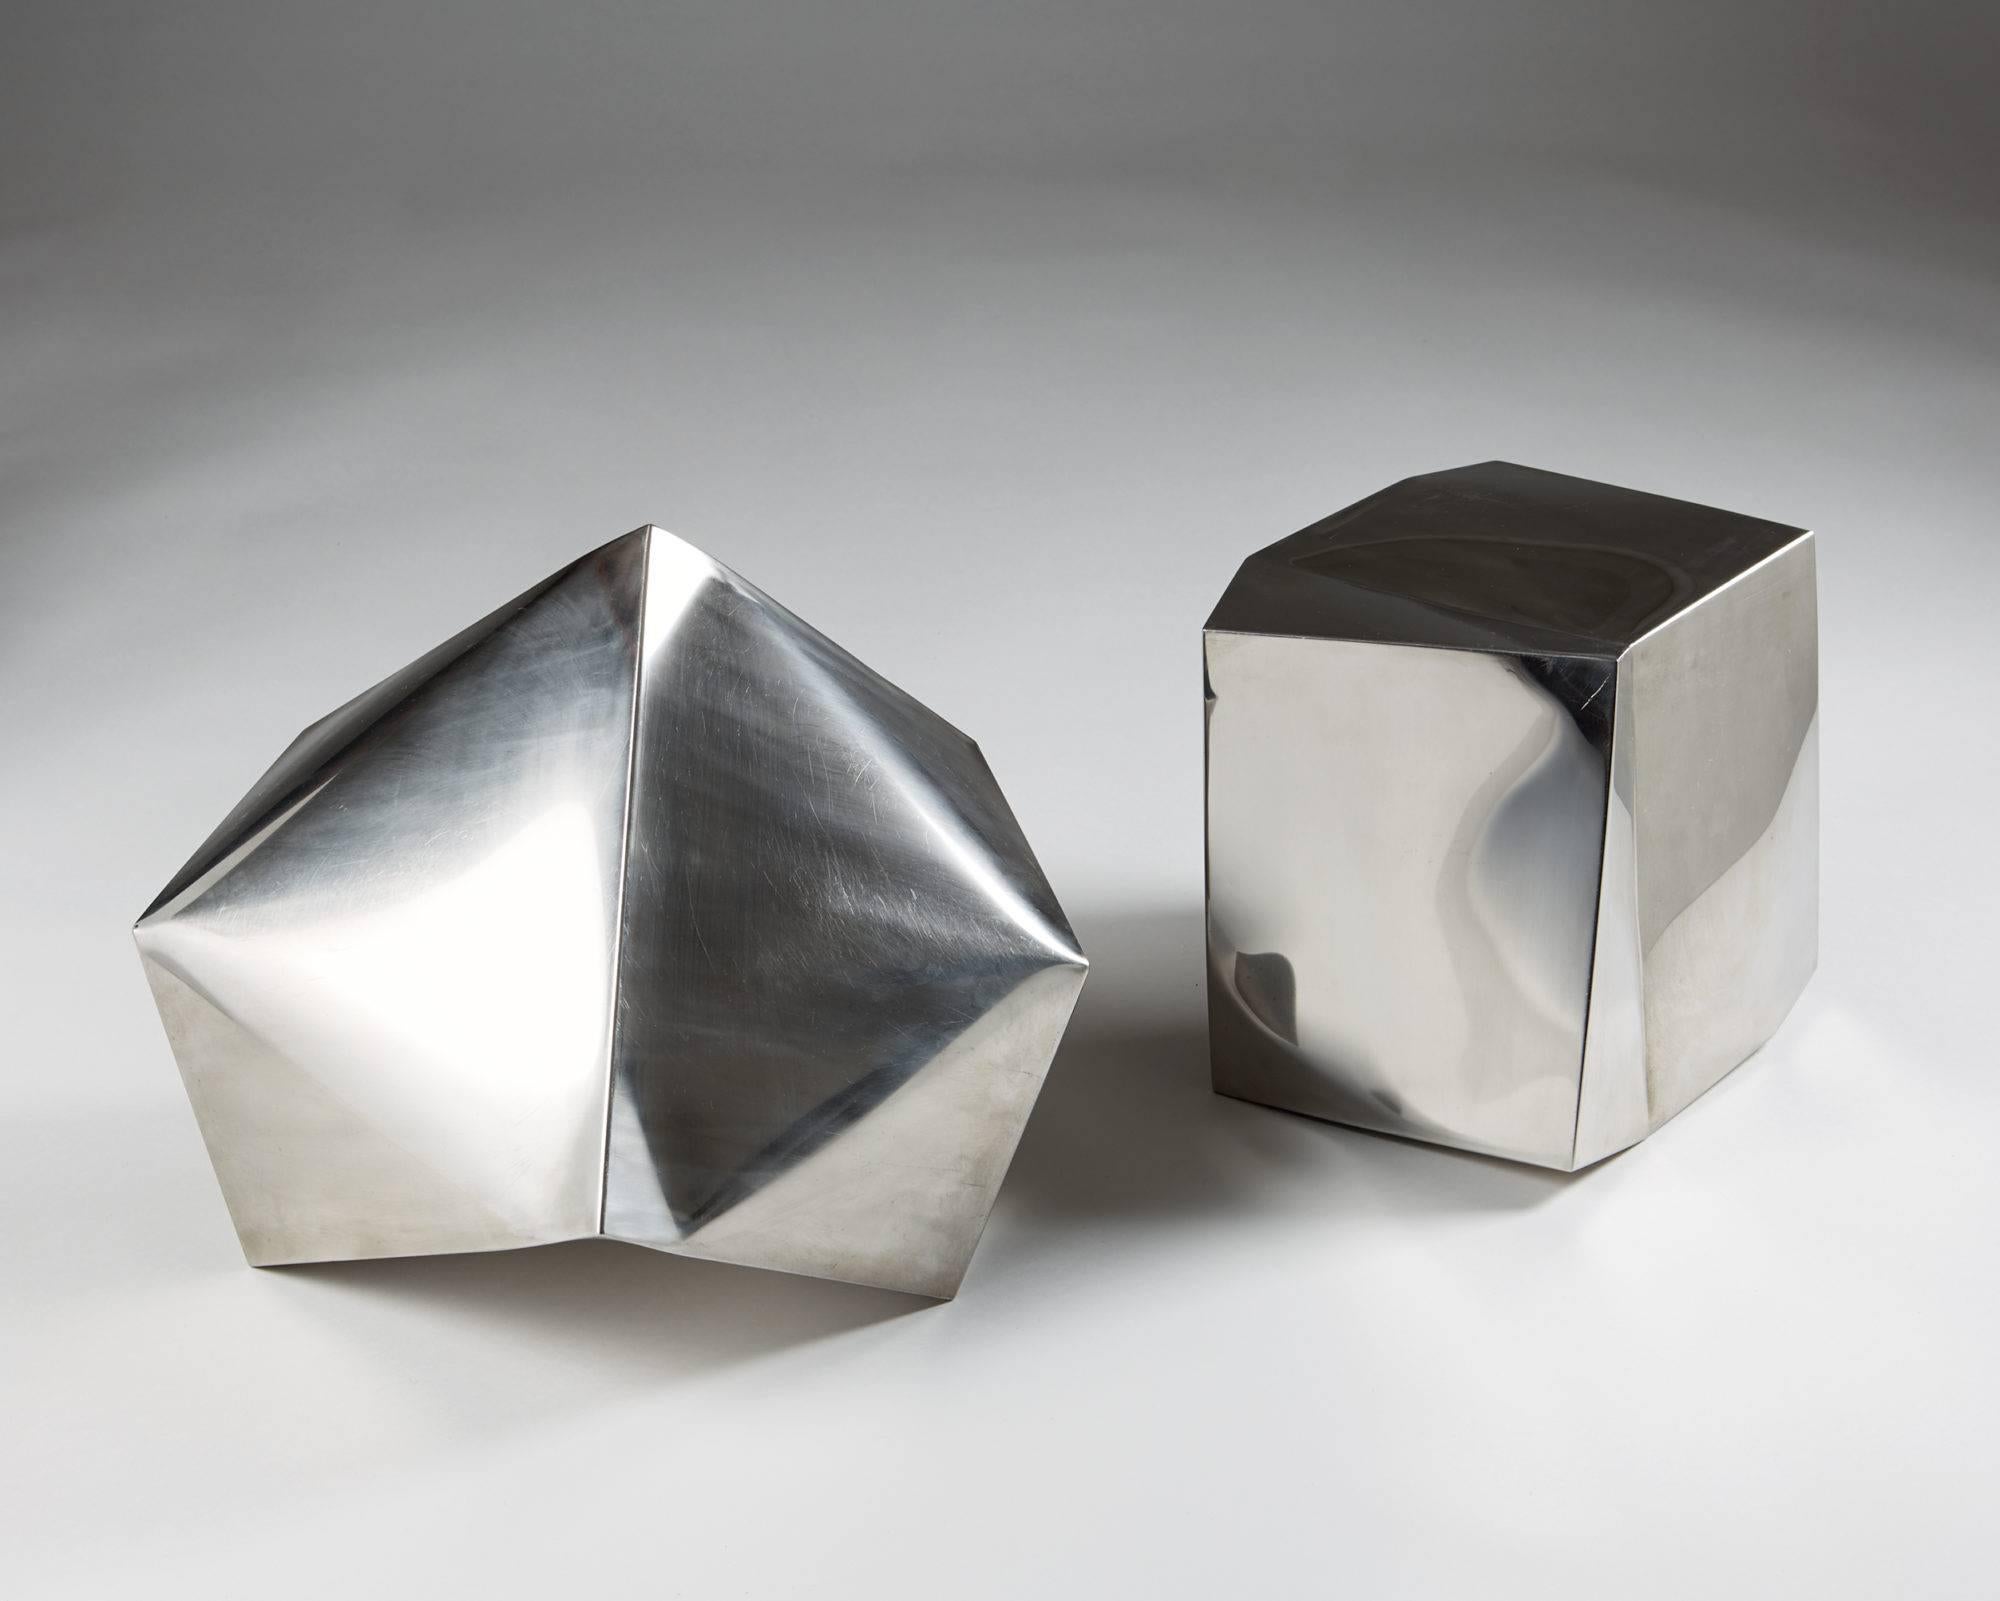 Pair of sculptures untitled by Ib Agger, 
Denmark, 2006.

Polished steel.

Provenance: Galleri DGV, Svendborg, Denmark.

Measures: Height of the smaller 31 cm/ 12 1/4''
Height of the larger 34 cm/ 13 1/2''.